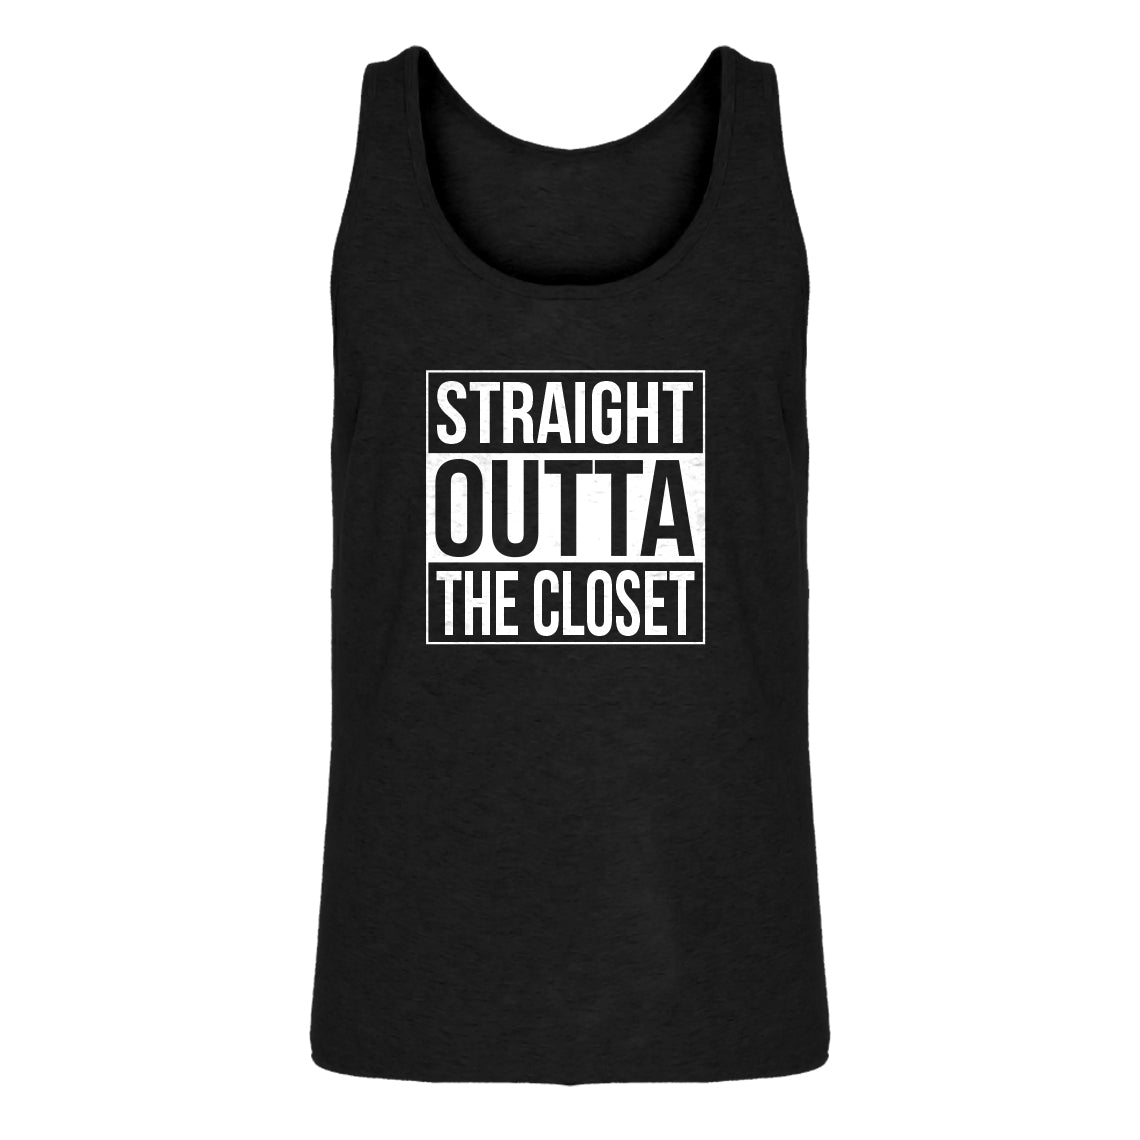 Mens Straight Outta the Closet Jersey Tank Top